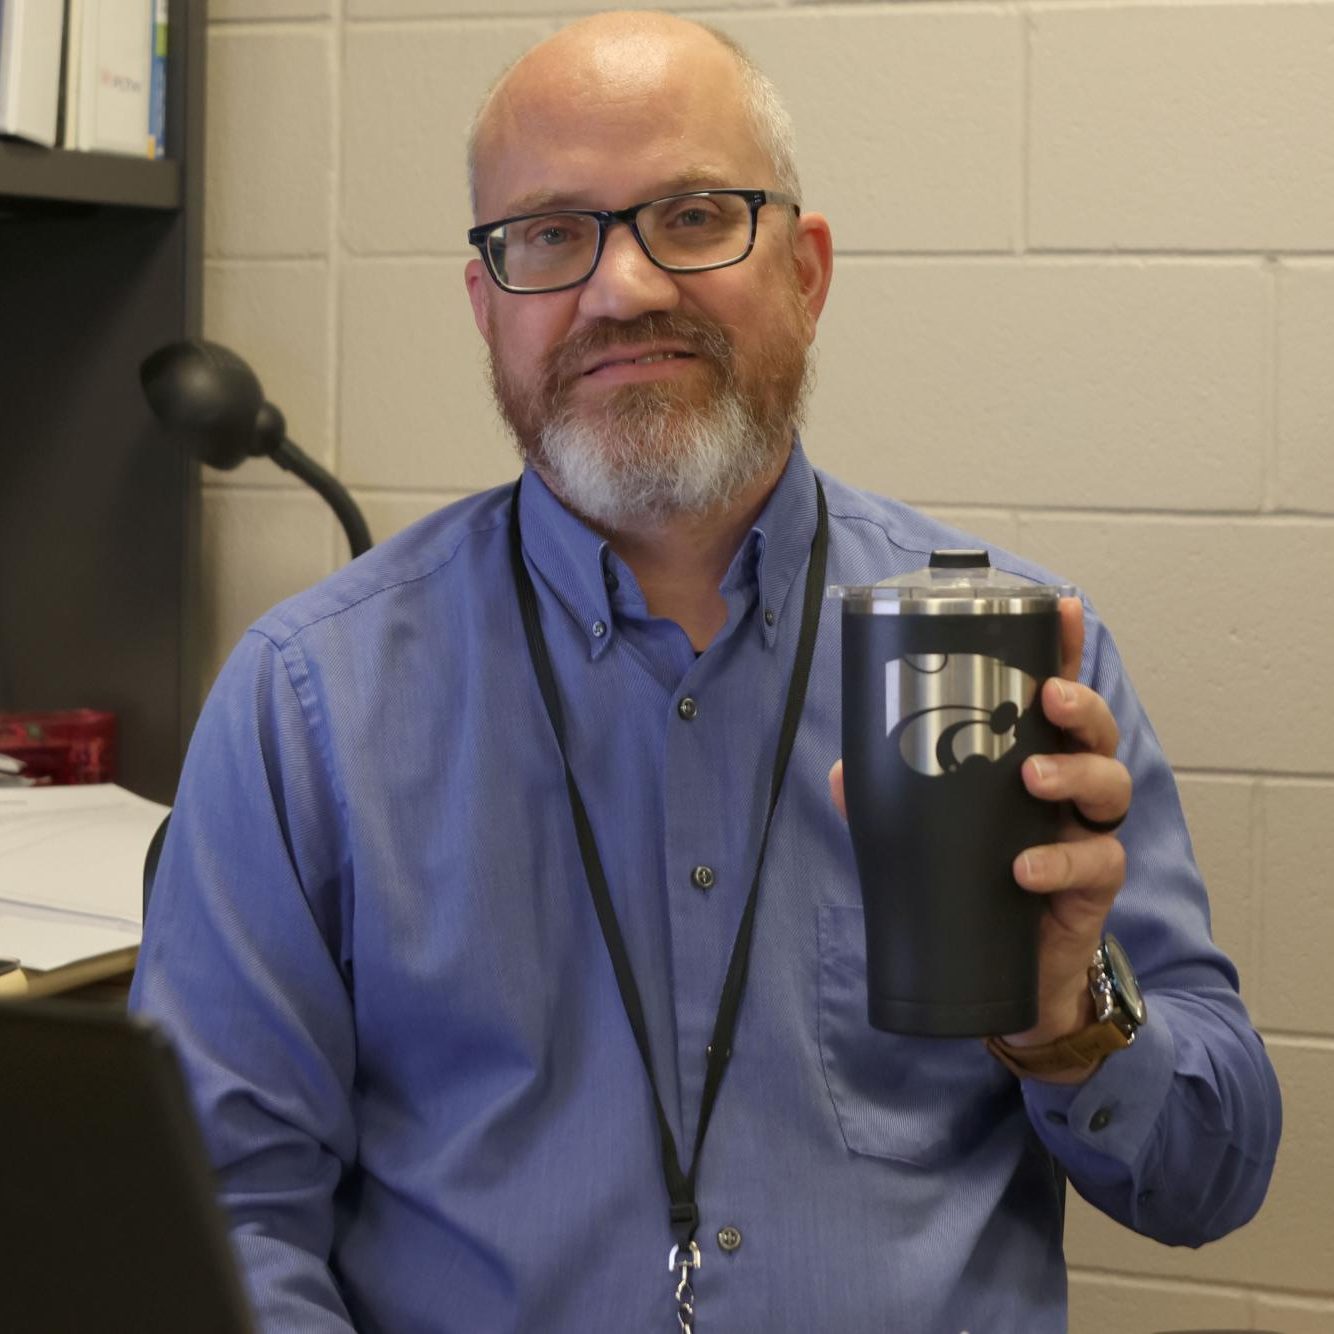 Holding his K-State mug, CAD teacher Craig Morrow sits at his desk. My wife got that for me for one of my birthdays and so that meant a lot, Morrow said.